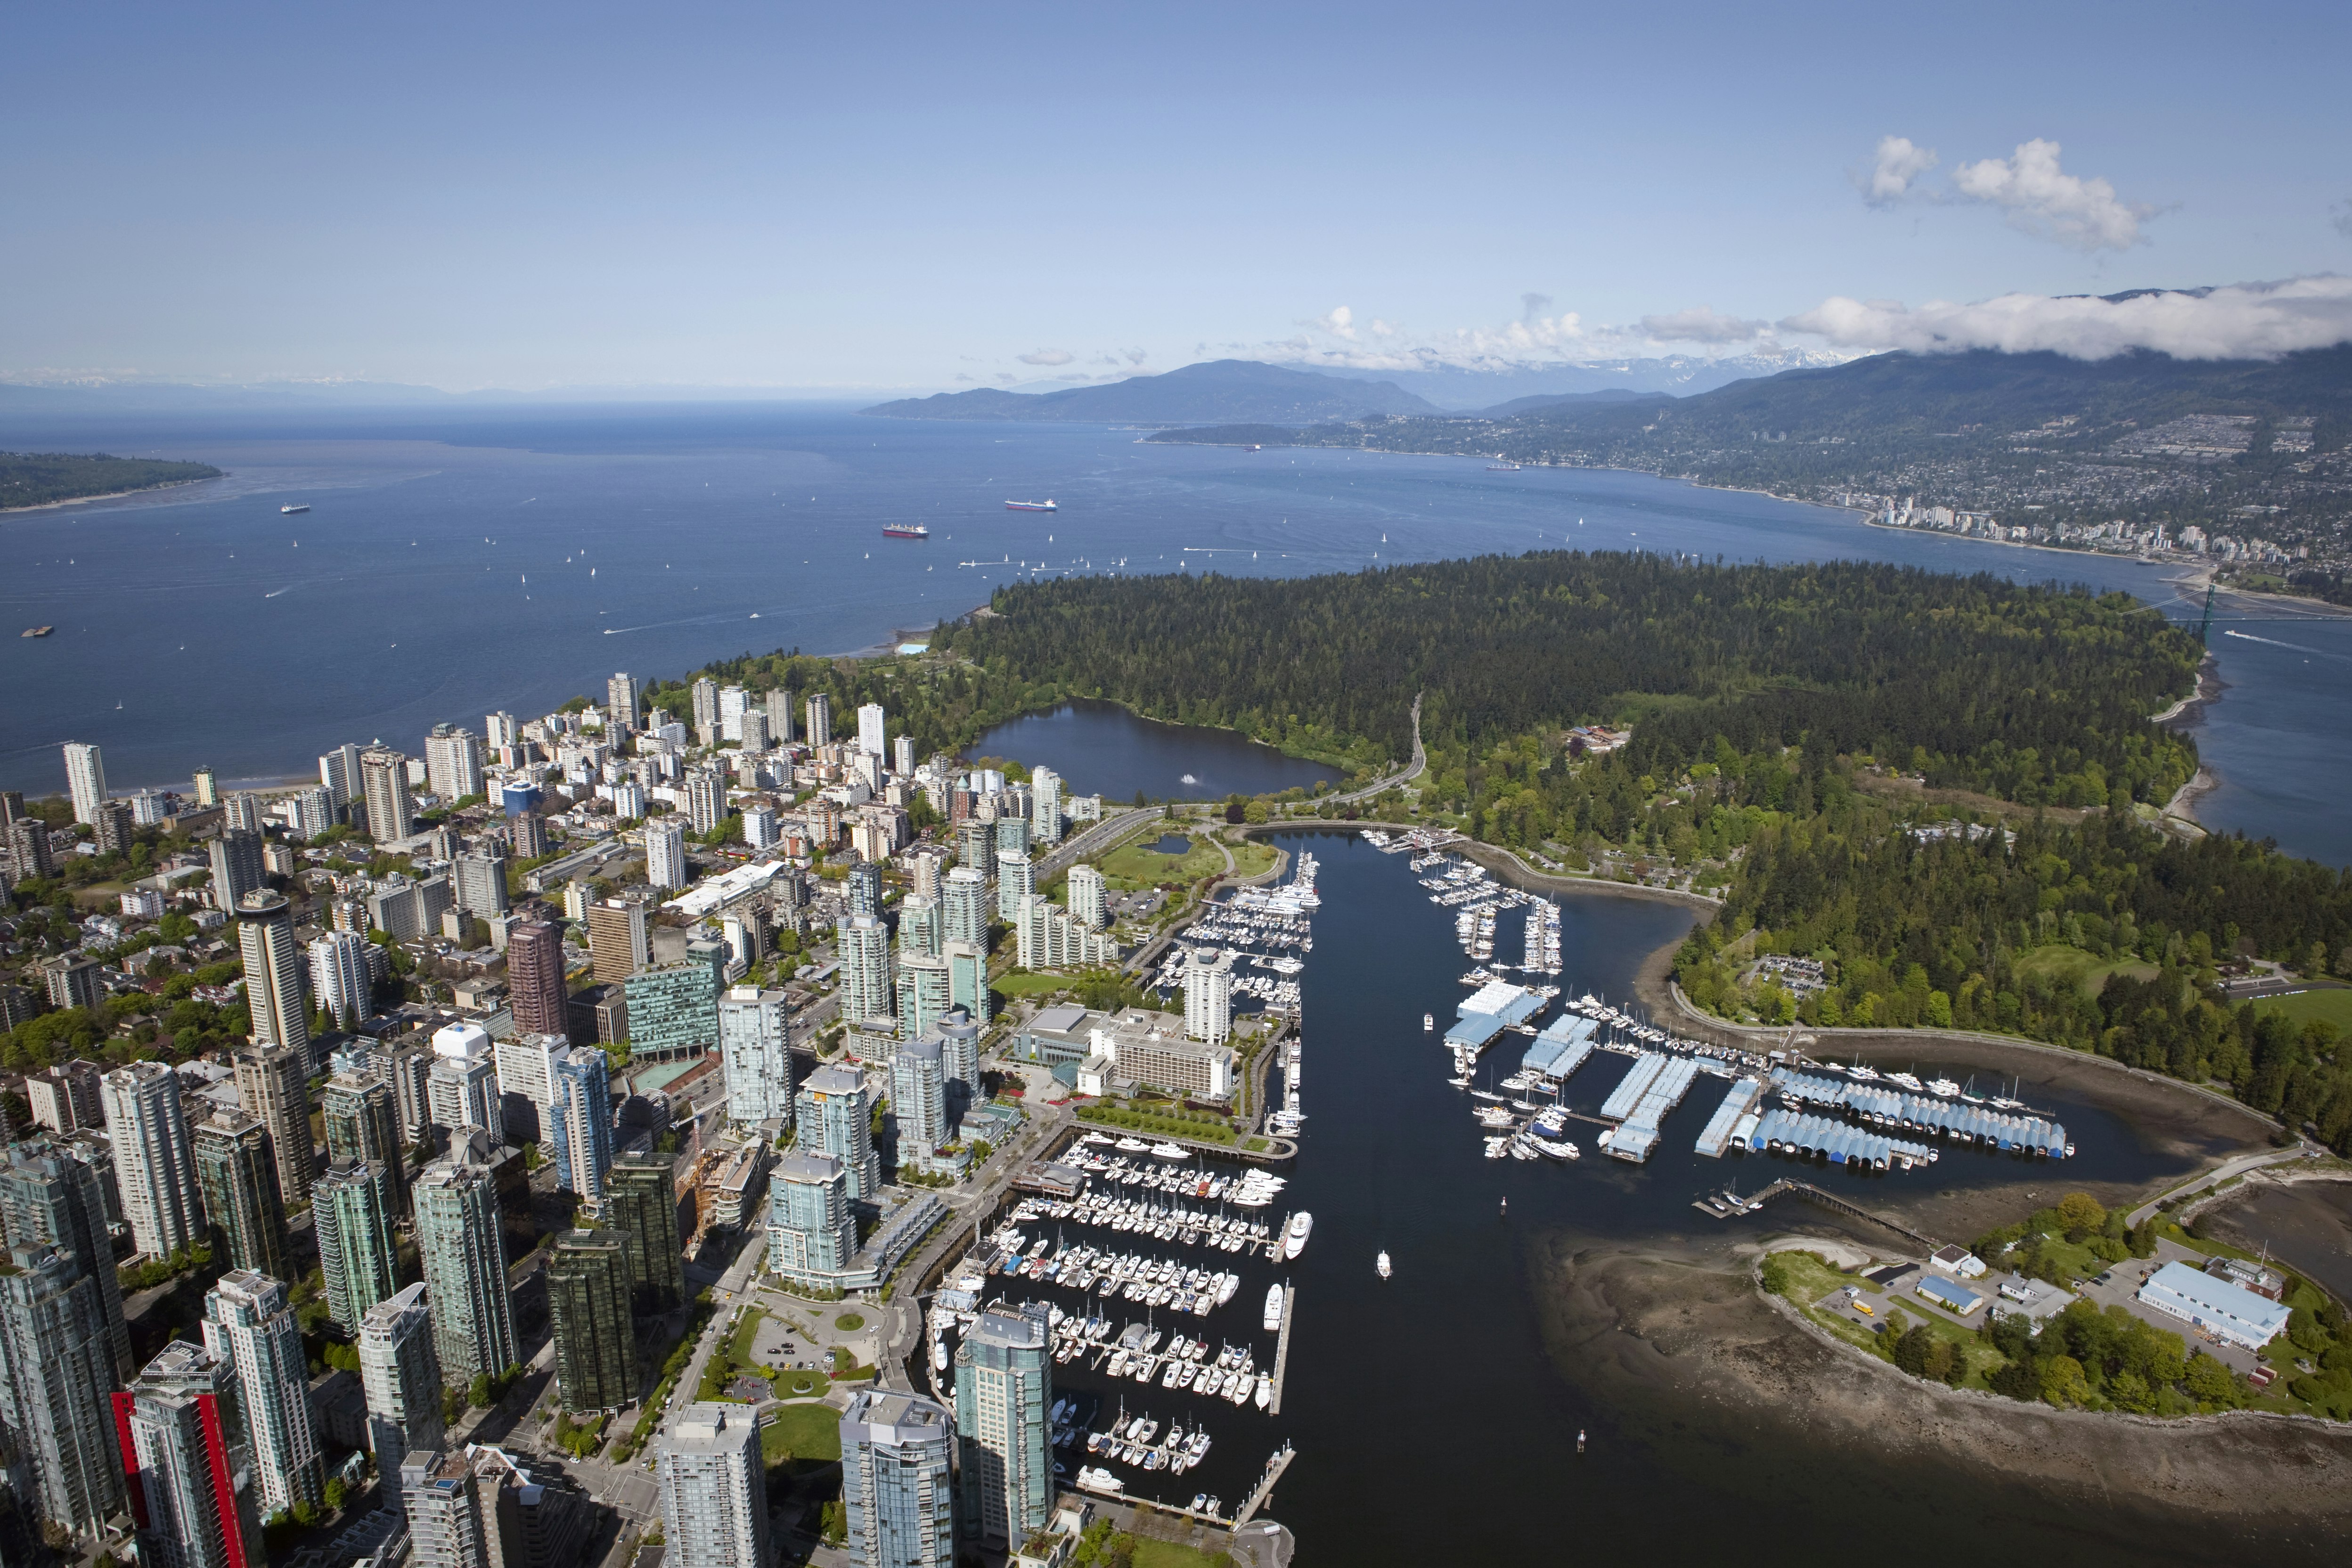 An aerial view of the city of Vancouver and Stanley Park, with harbors and buildings on one side connected to a wooded island with the sound in the background. The Vancouver Greenest City 2020 Action Plan is coming up on its target date.